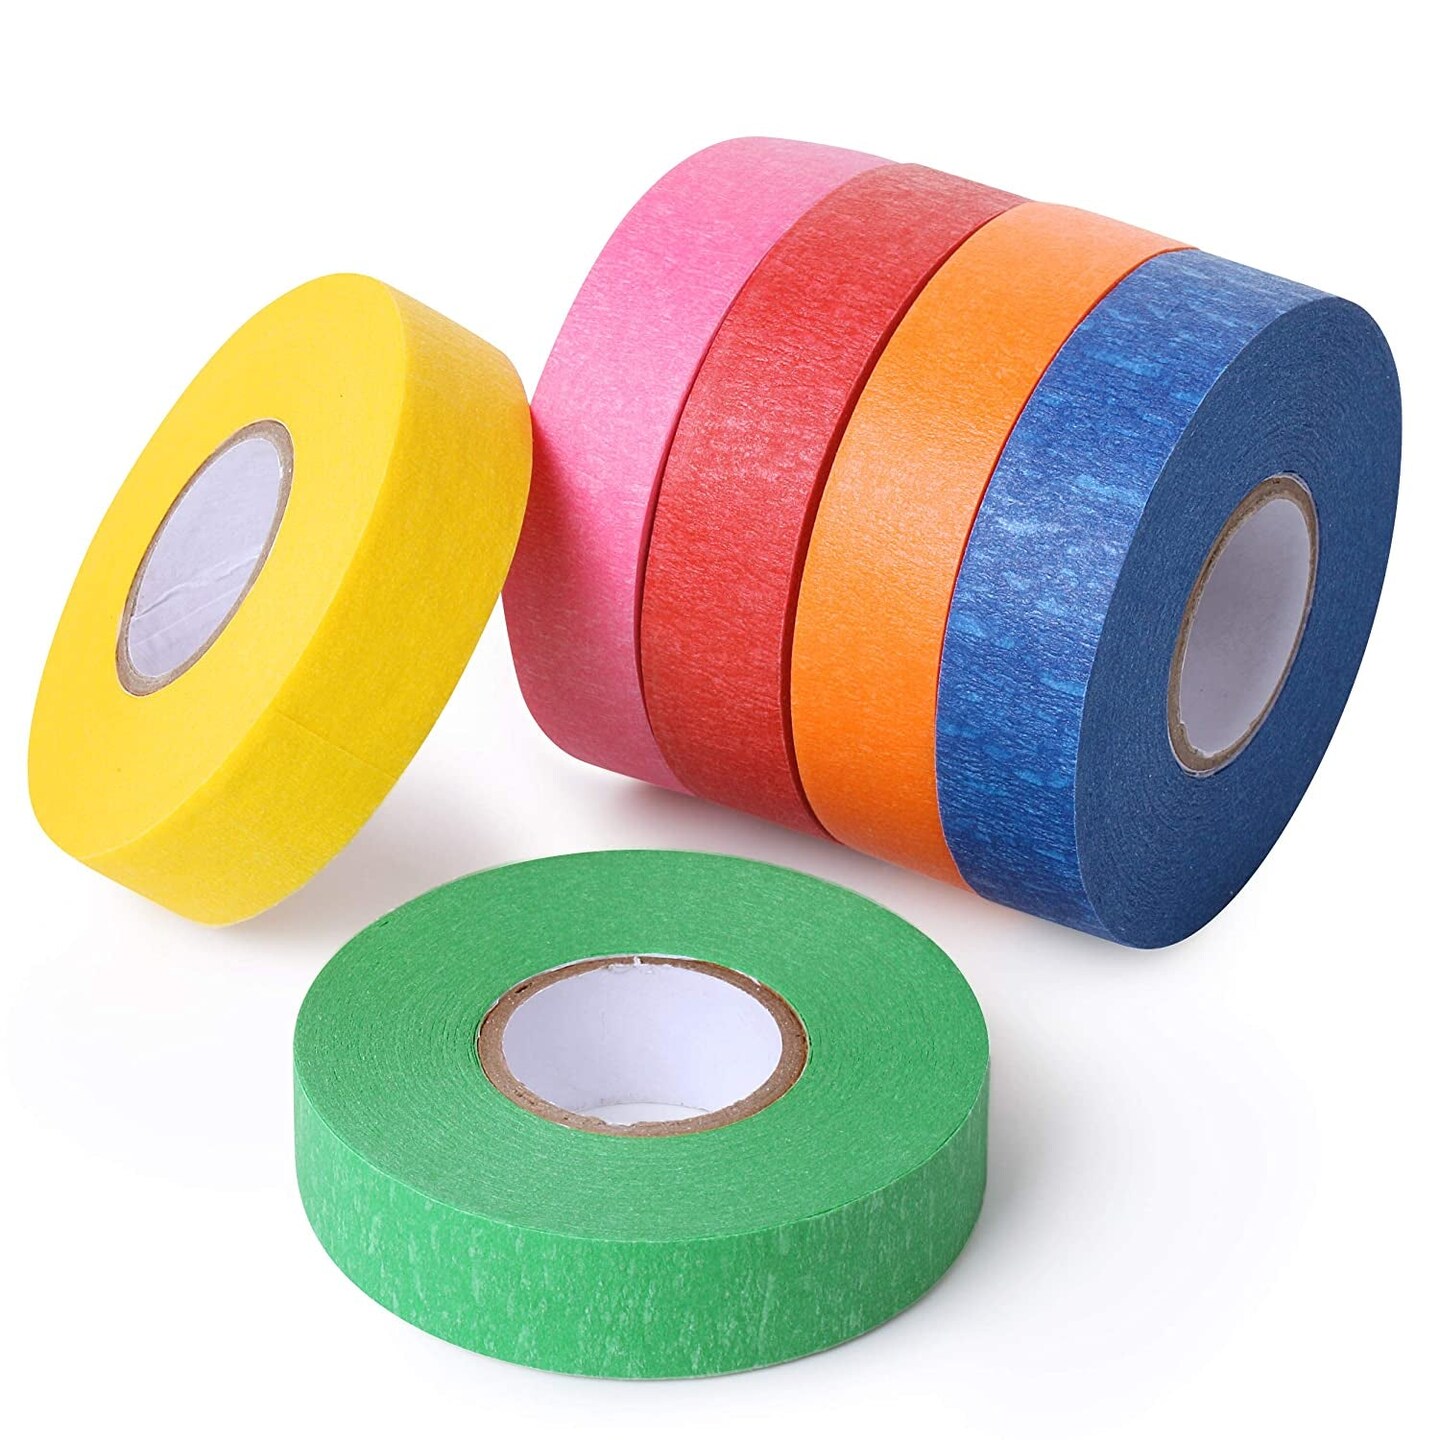 Colored Masking Tape, Colored Painters Tape for Arts and Crafts, 6 Pack,  Drafting Tape, Craft Tape, Labeling Tape, Paper Tape, Masking Tape, Colored  Tape, Colorful Tape, Artist Tape, Art Tape